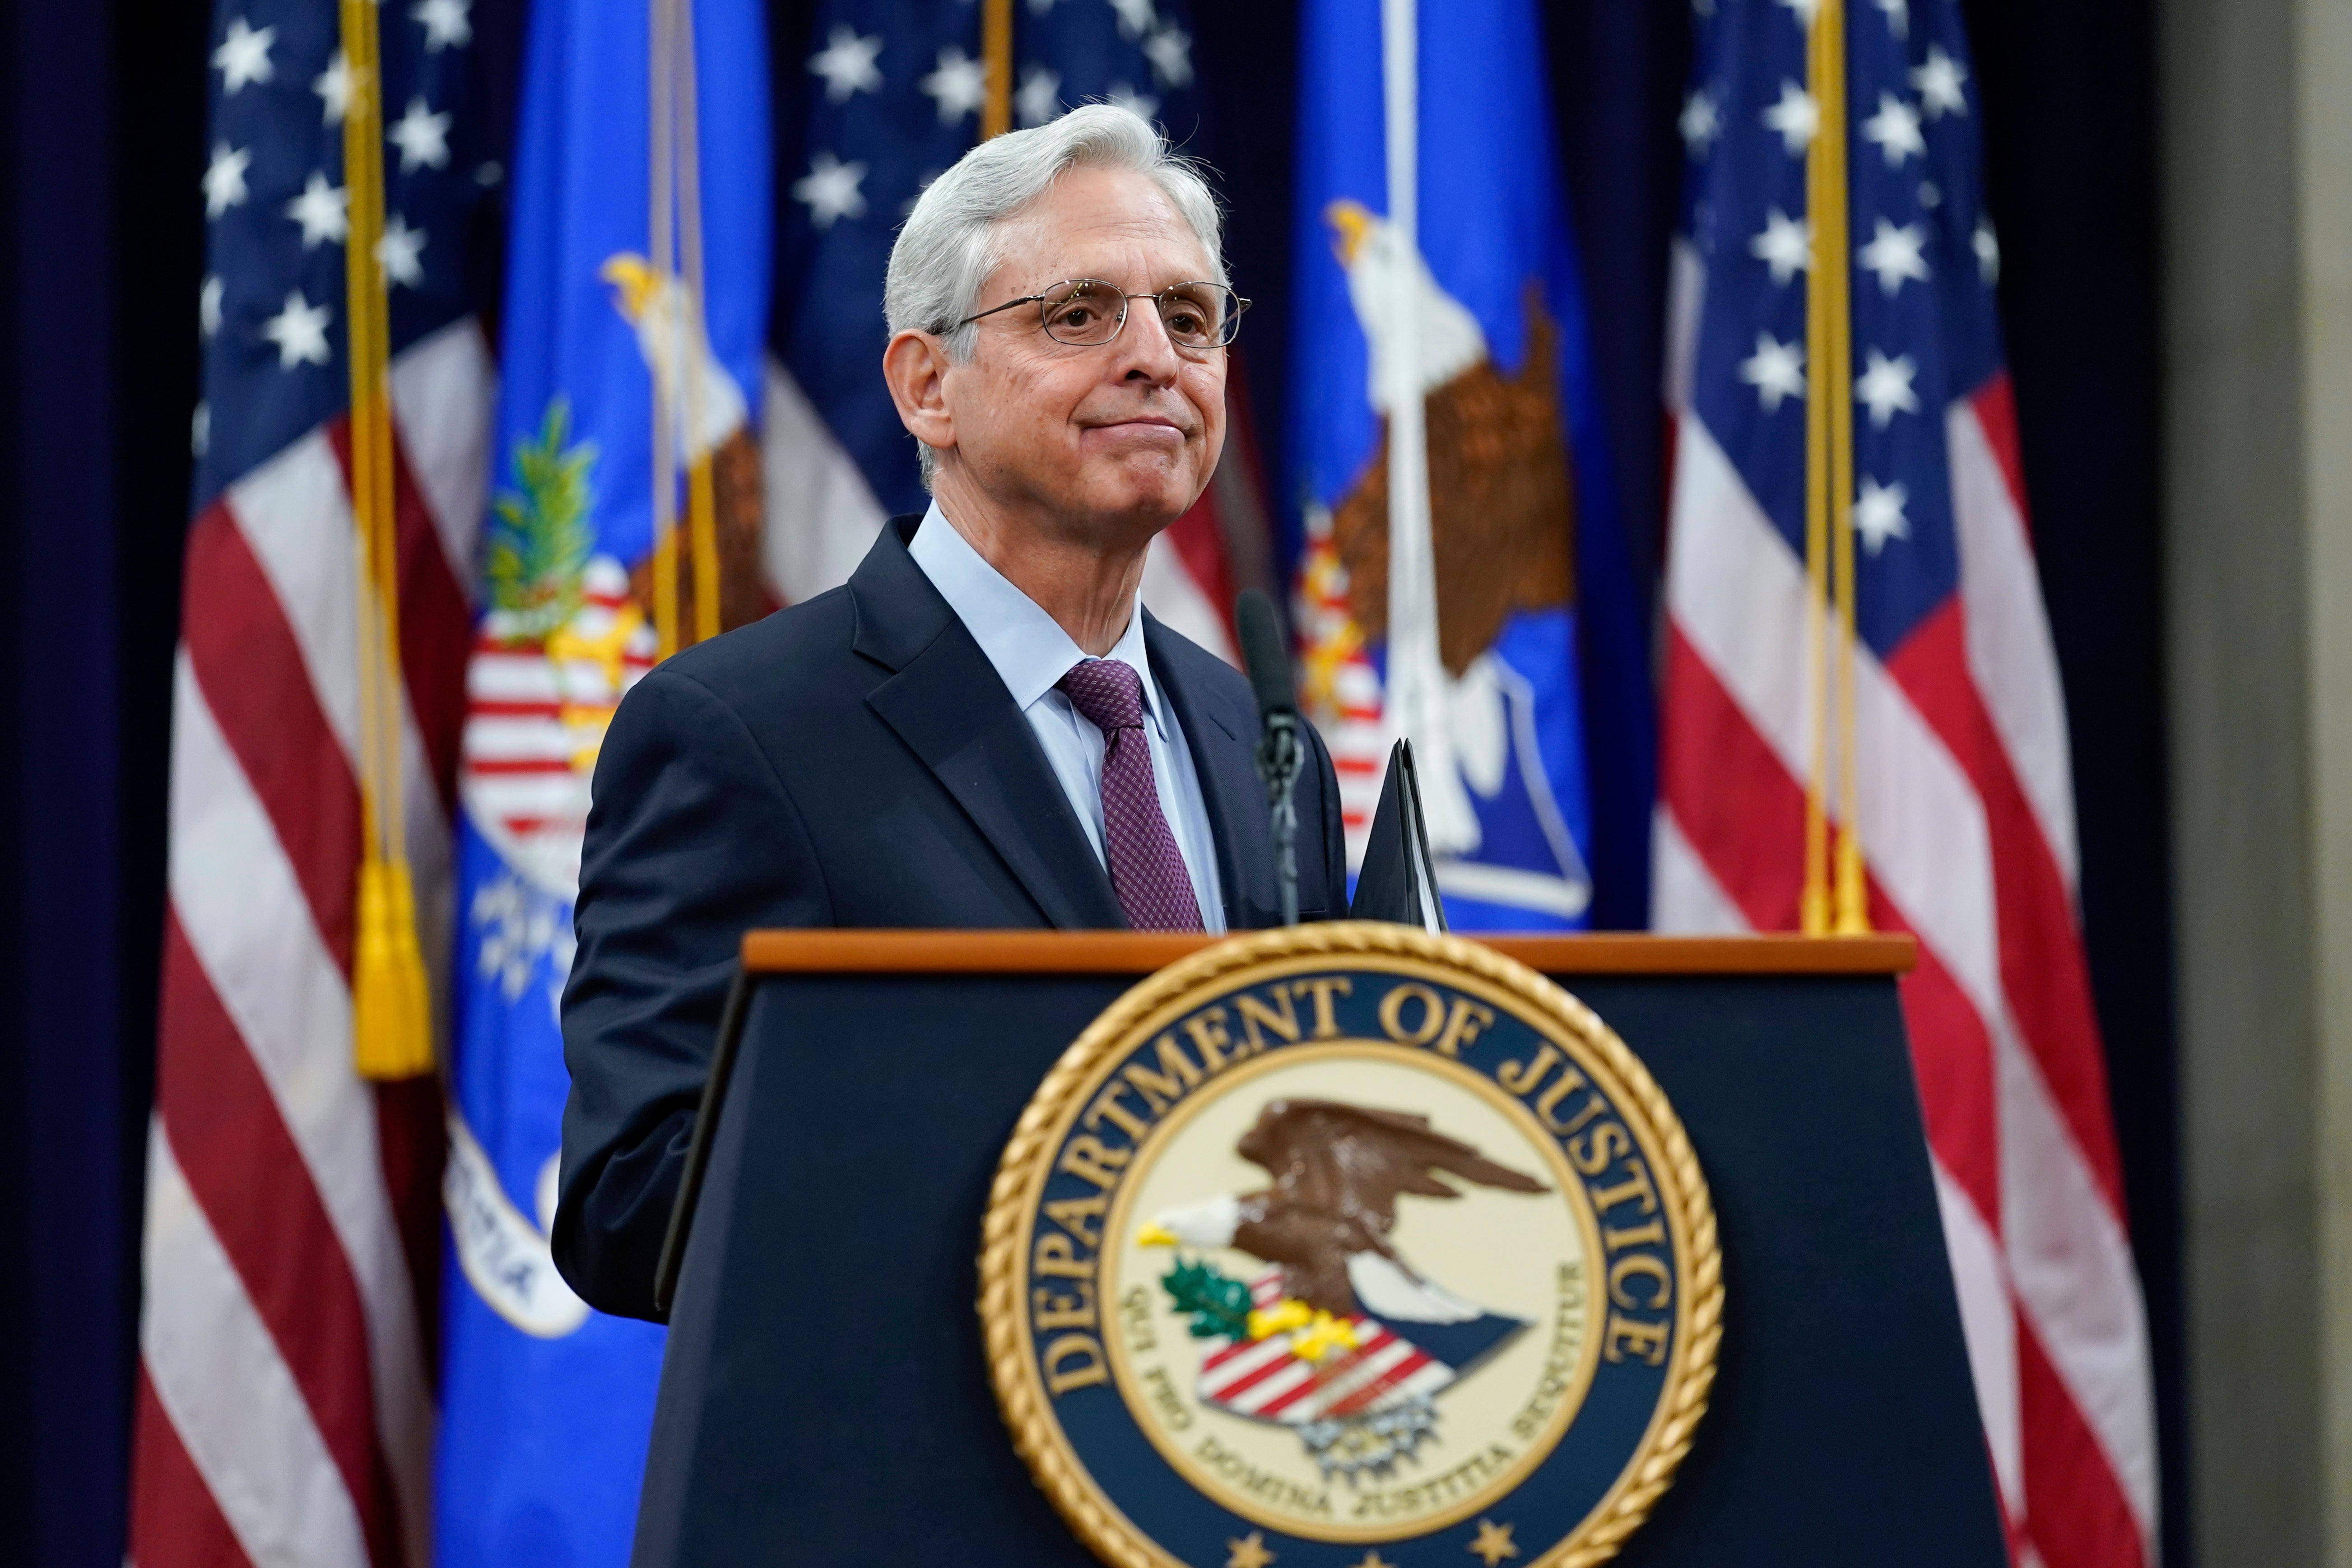 Attorney General Merrick Garland pauses as he finishes speaking at the Department of Justice in Washington, Wednesday, Jan. 5, 2022, in advance of the one year anniversary of the attack on the U.S. Capitol. (AP Photo/Carolyn Kaster, Pool)